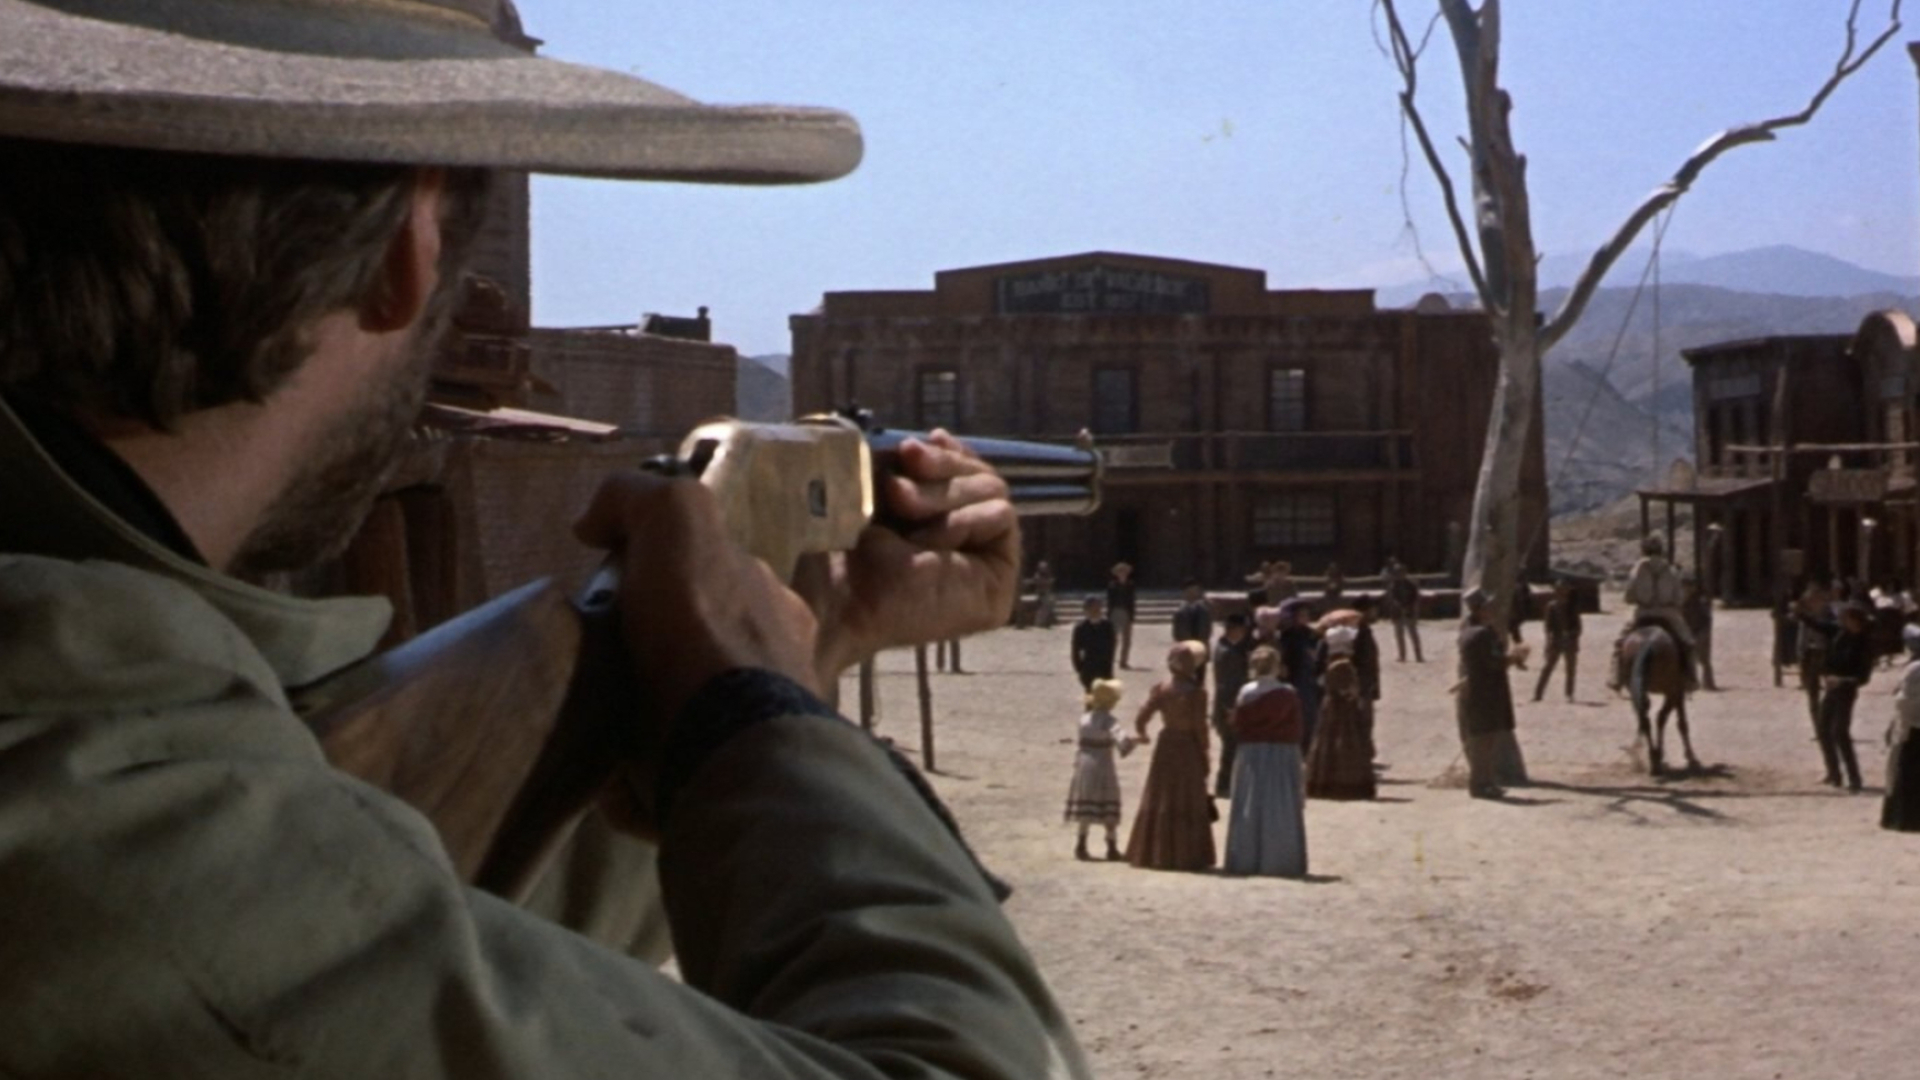 The Good, The Bad And The Ugly, Western film, Epic showdown, Gun-slinging action, 1920x1080 Full HD Desktop